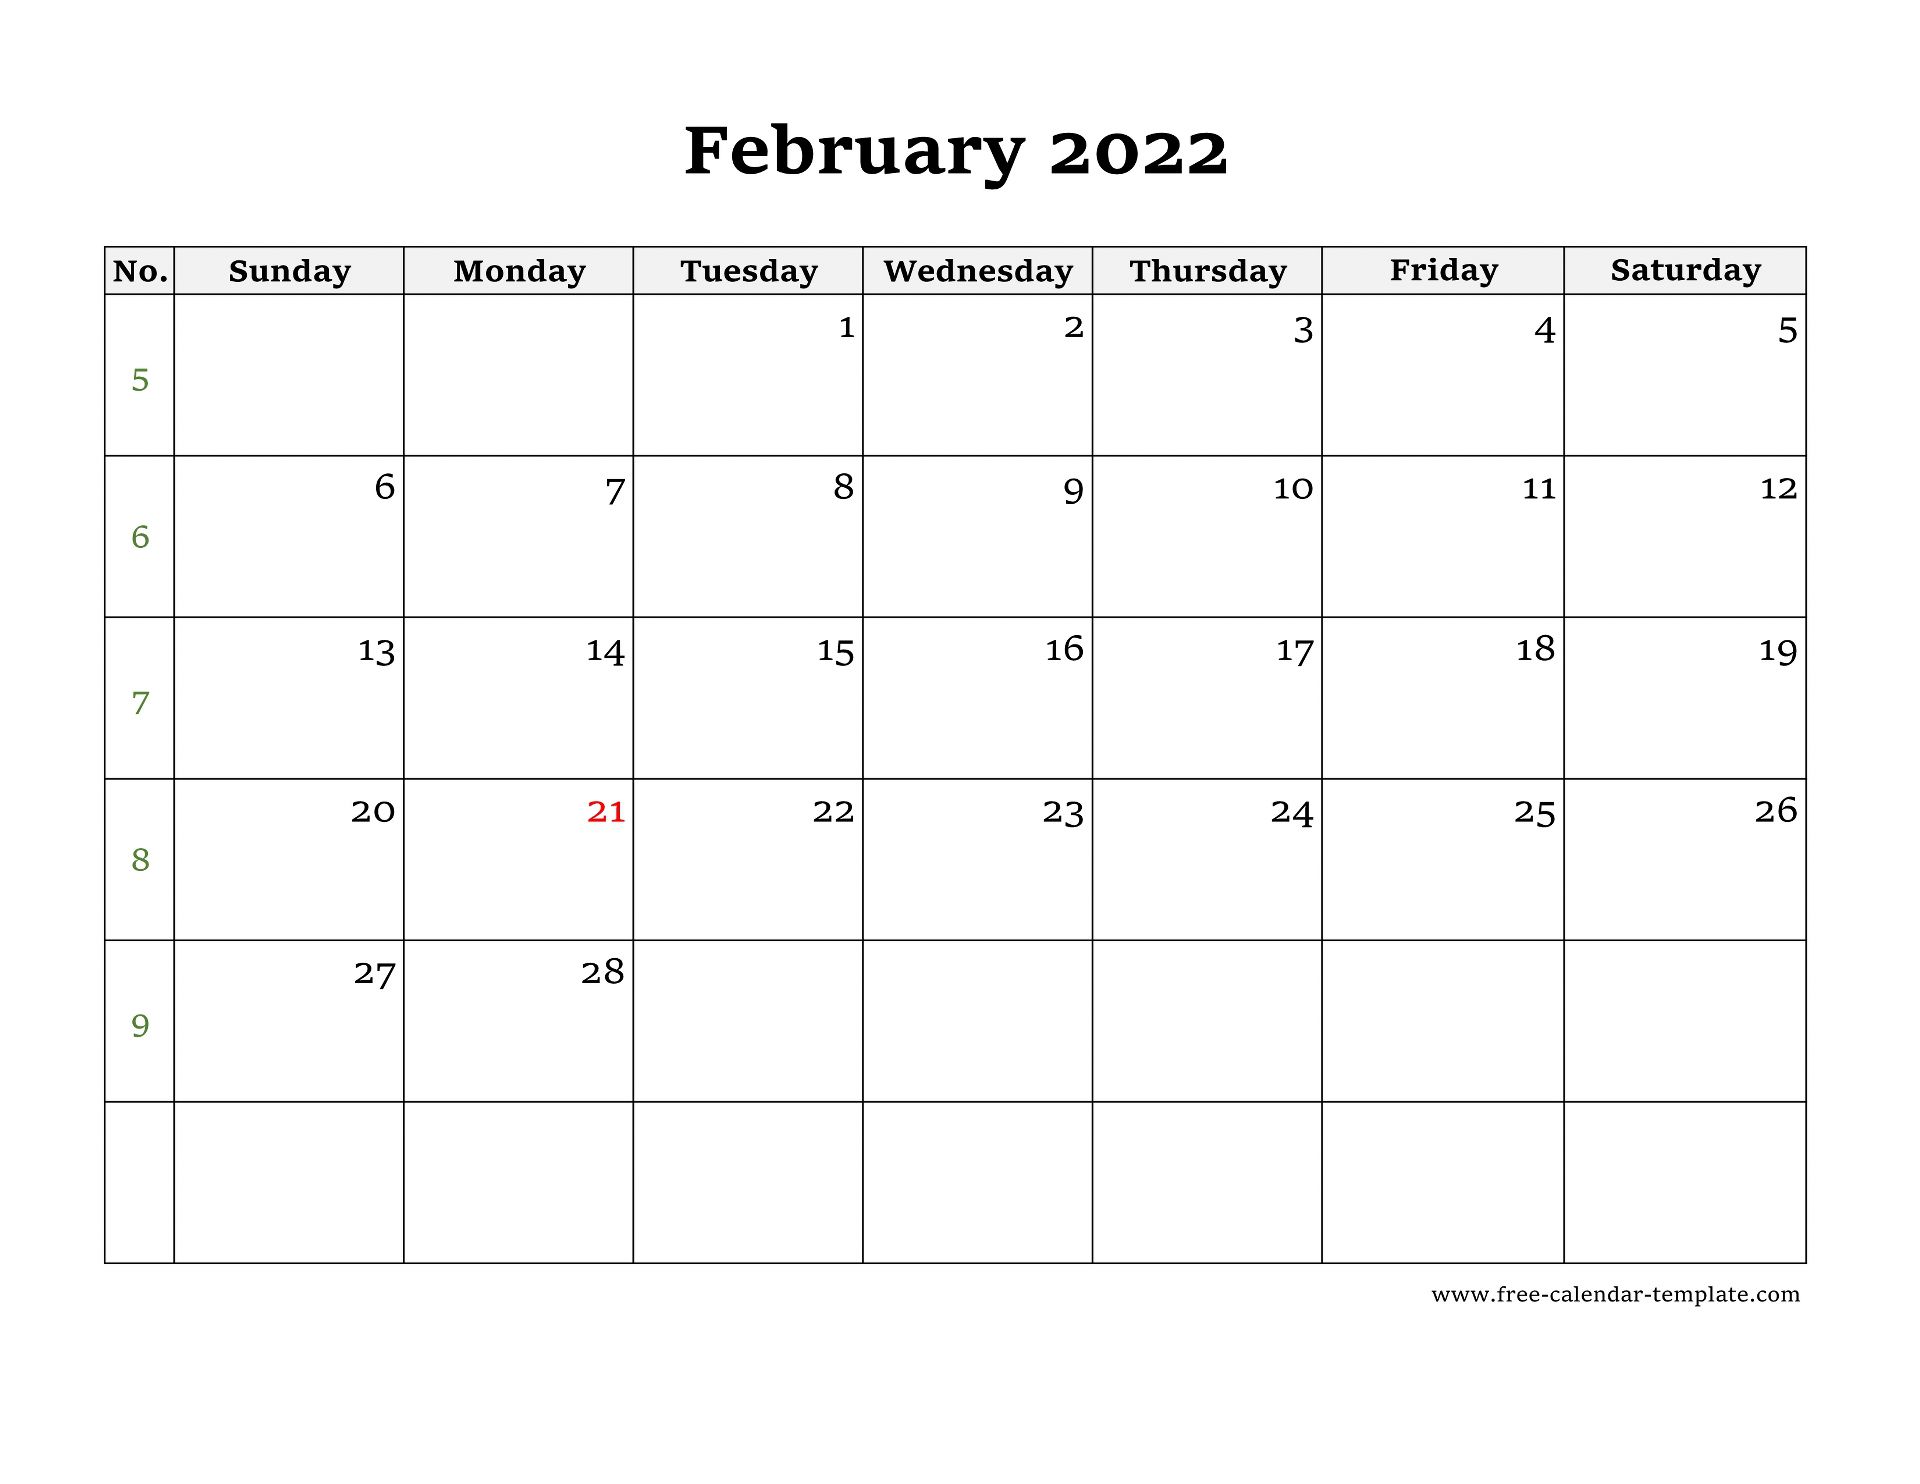 Simple February Calendar 2022 large box on each day for notes. Free